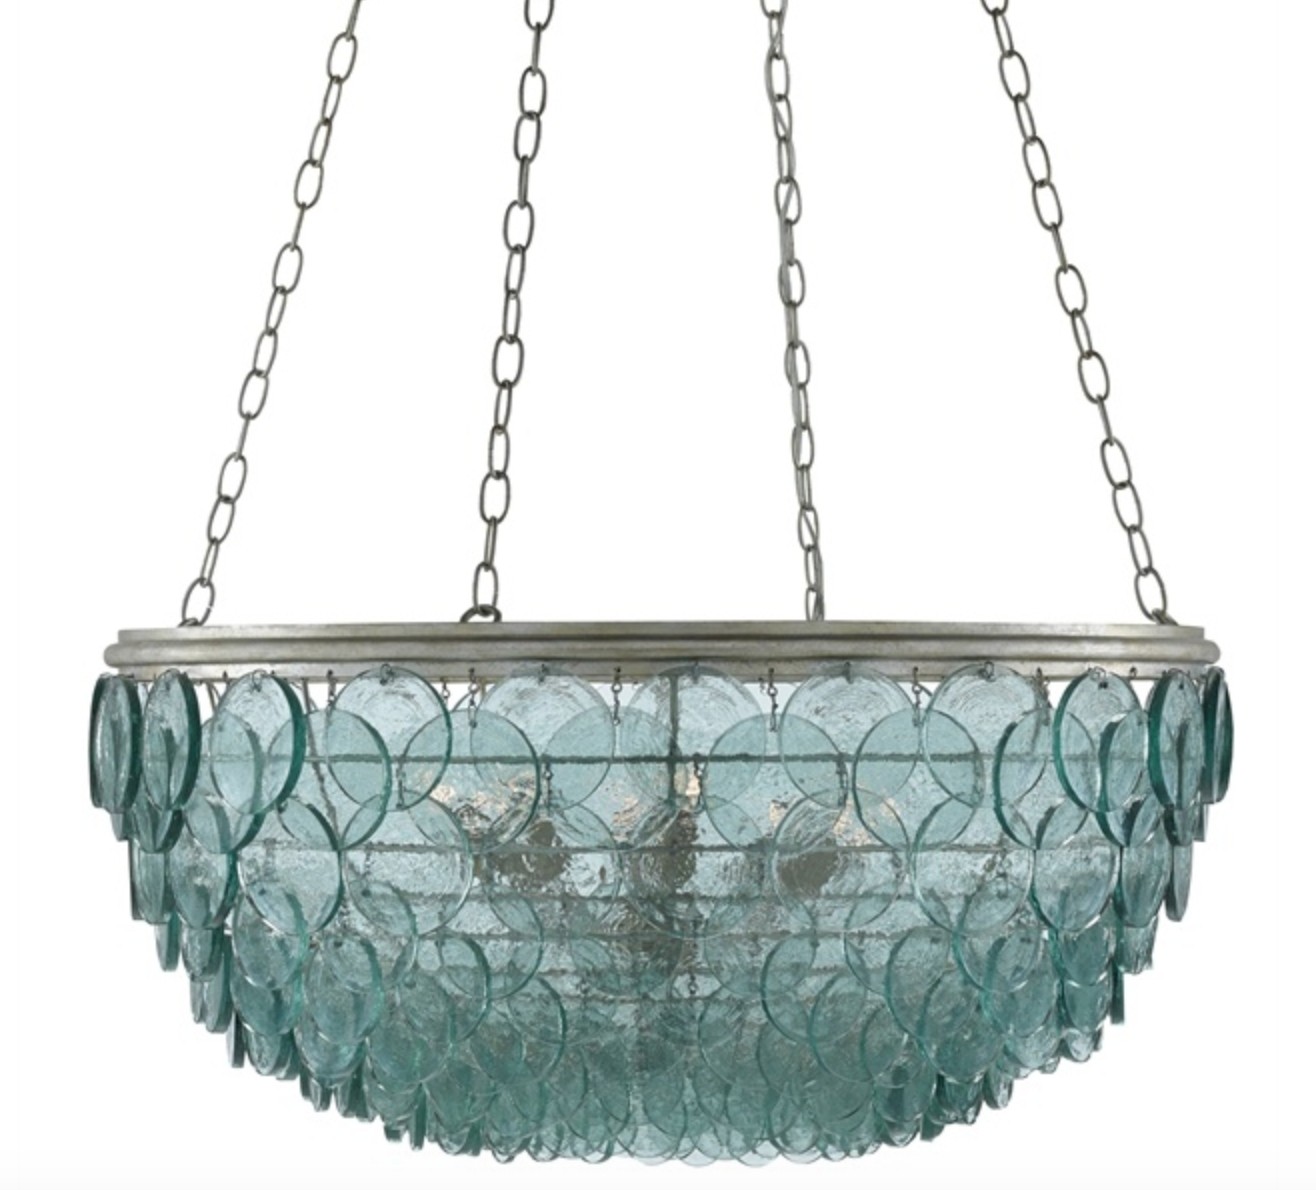 Chandeliers revibe designs